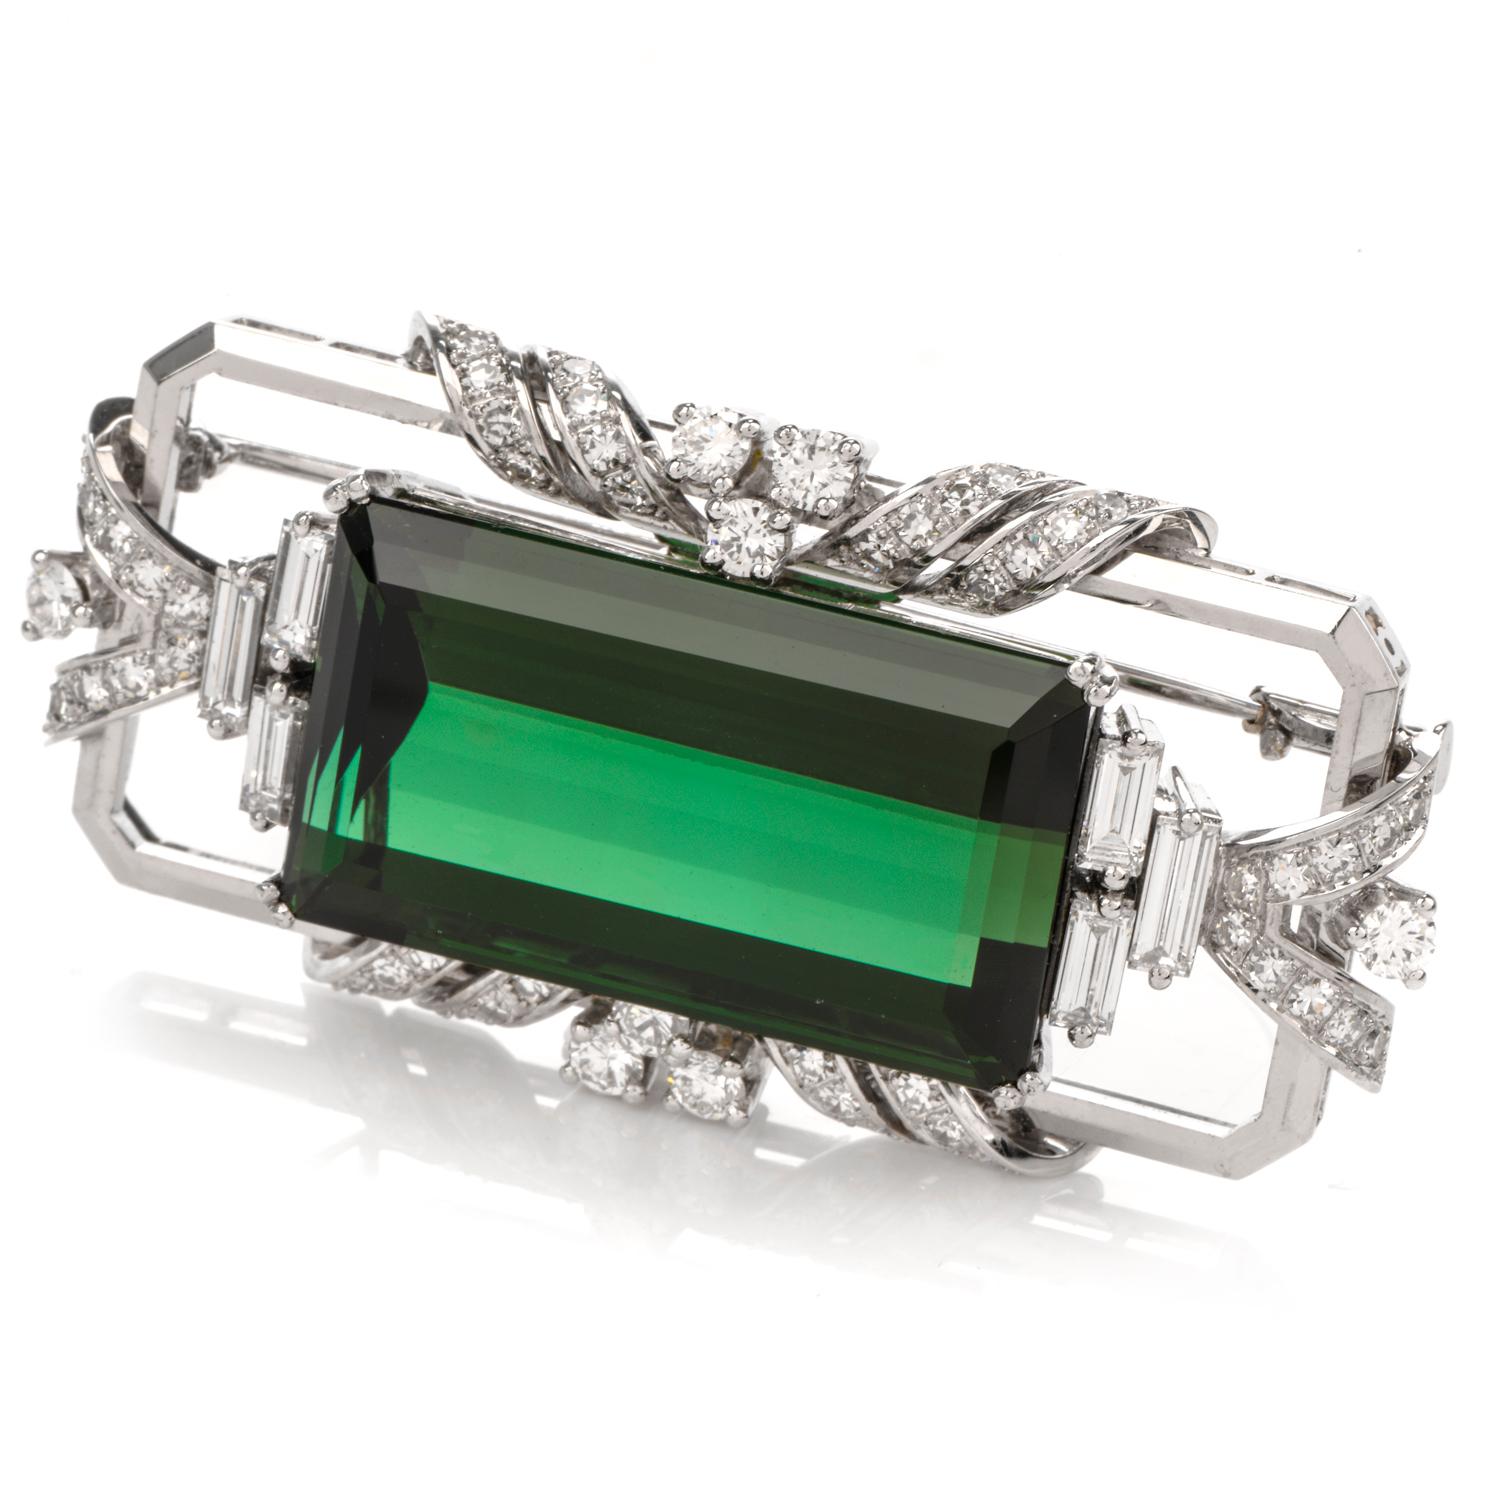 This sophisticated High quality tourmaline and diamond pin brooch is hand exceptionally hand crafted in solid 18-karat white gold, weighing 21 grams and measuring 47mm long 23mm wide. Showcasing one prong set rectangular tourmaline of deep green